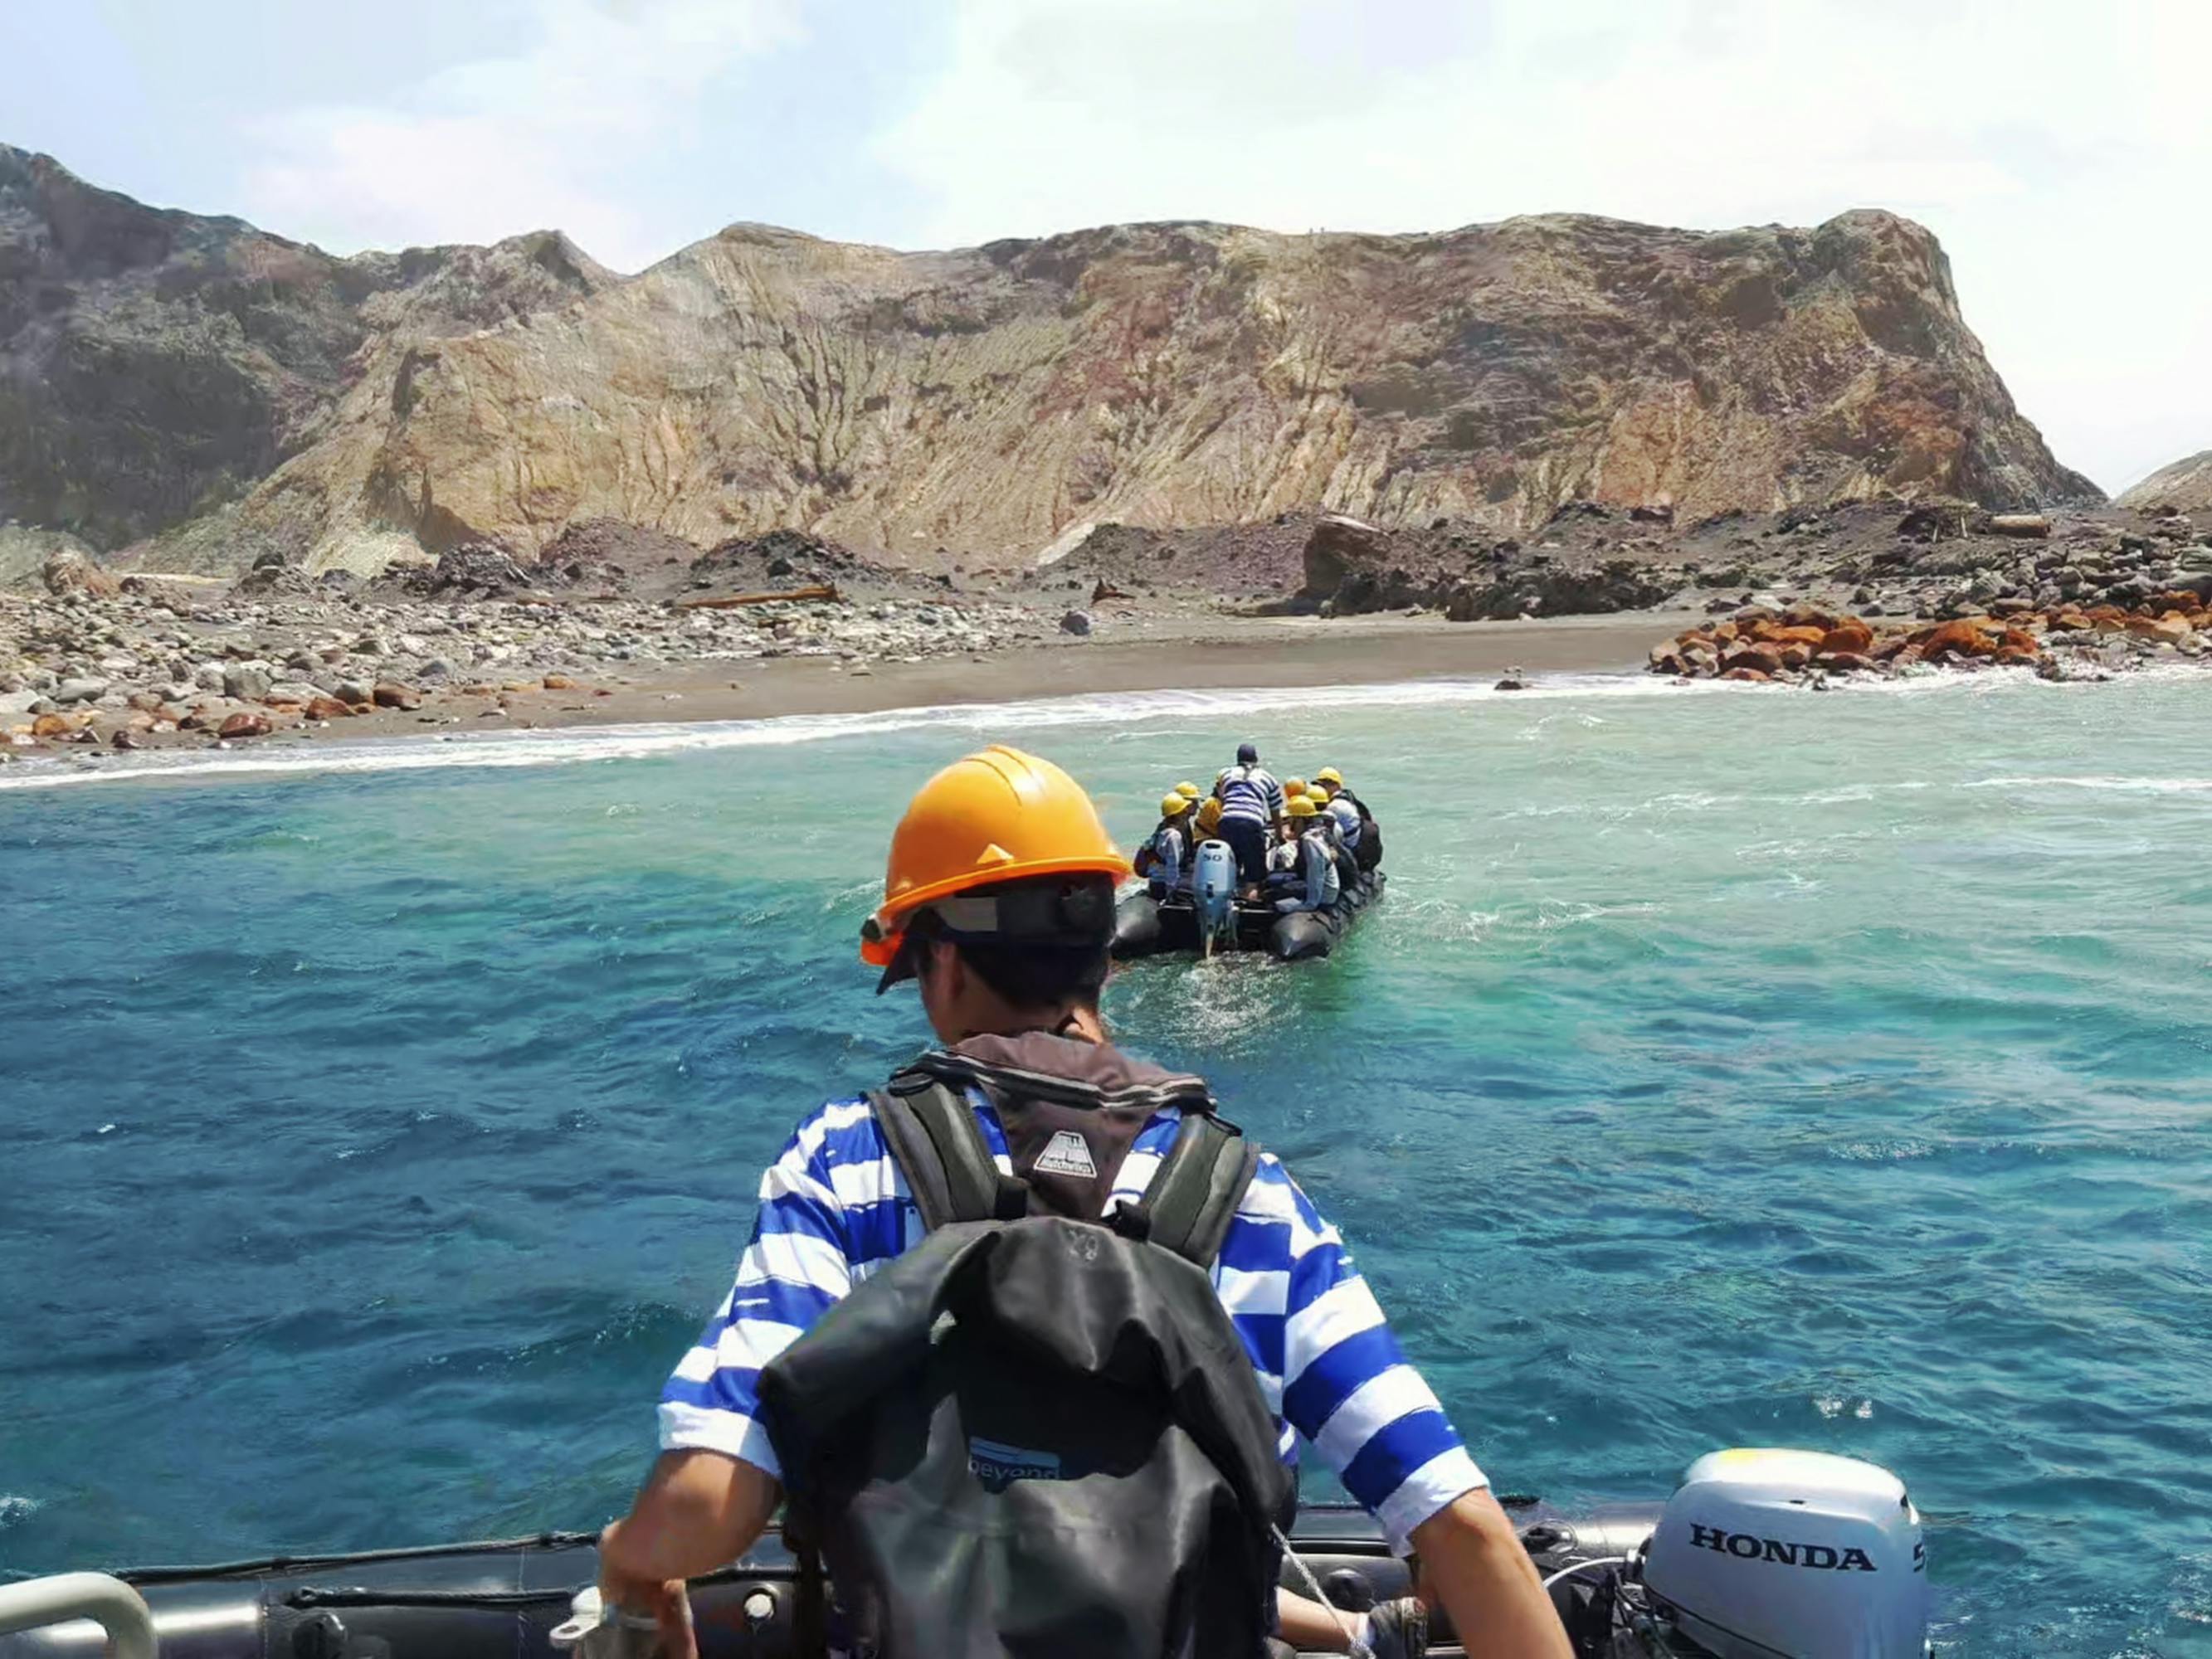 Tourist groups arrive at the volcano in small boats. The man in the foreground wears a white and blue striped shirt, and a yellow hard hat. 